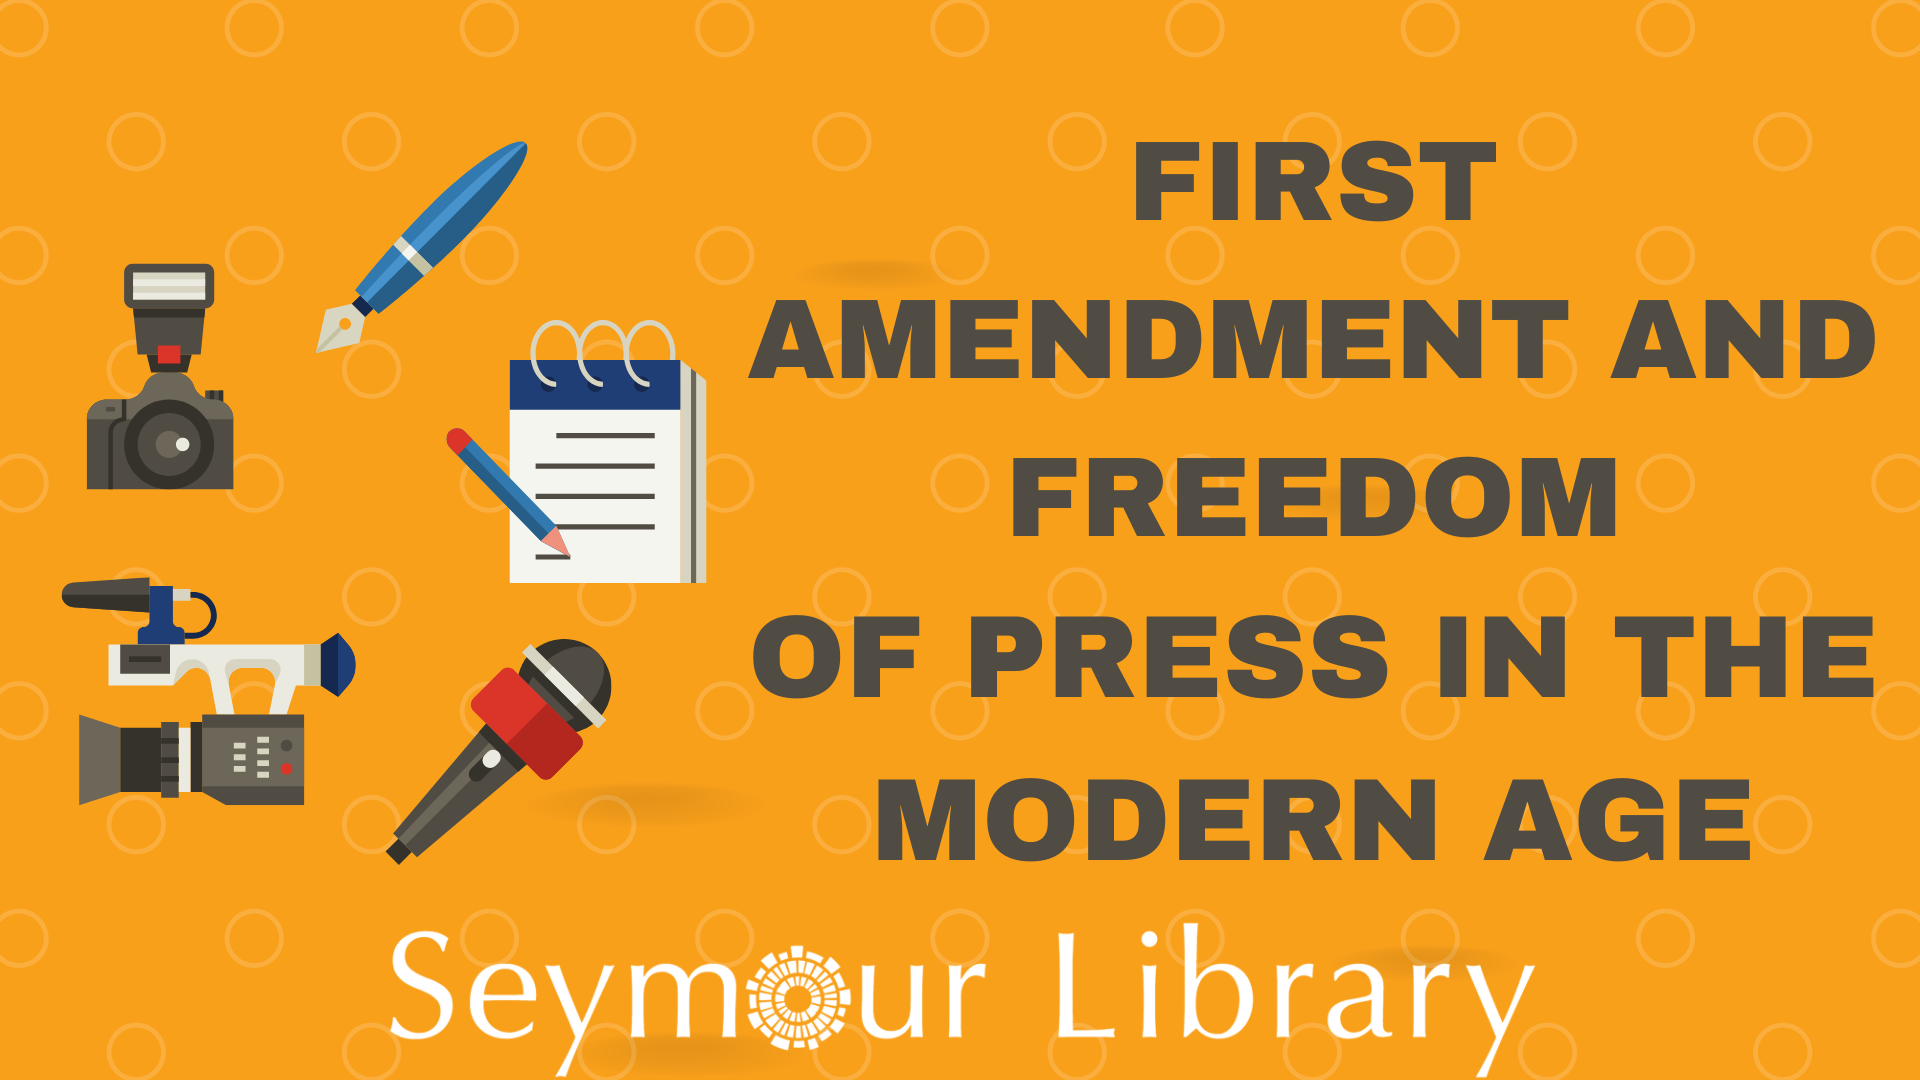 First Amendment and Freedom of Press in the Modern Age Tuesday, October 3 at 7 pm